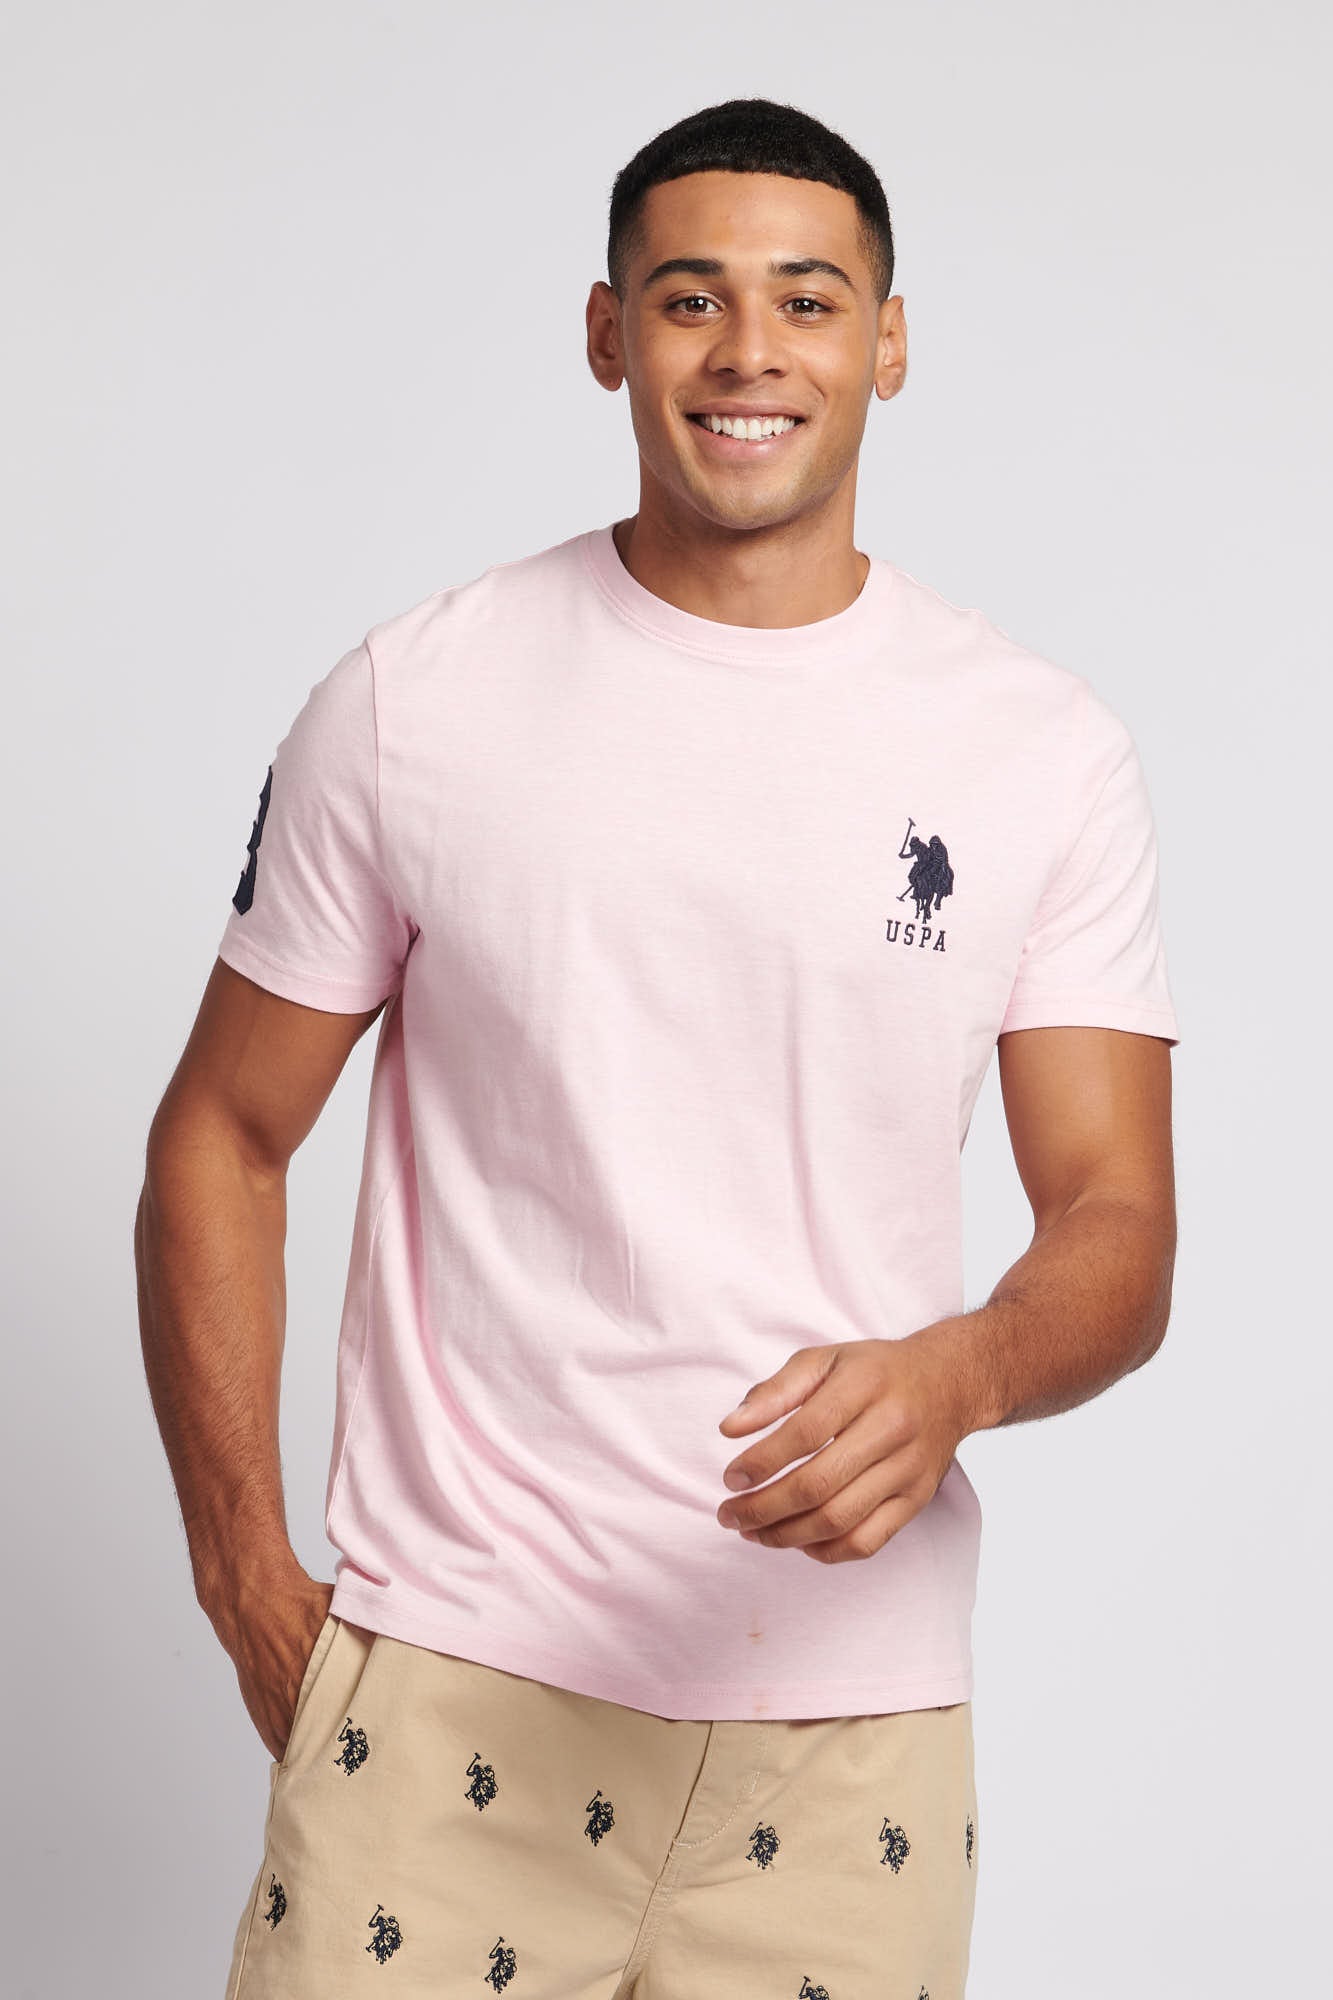 U.S. Polo Assn. Mens Player 3 T-shirt in Orchid Pink Marl – U.S.